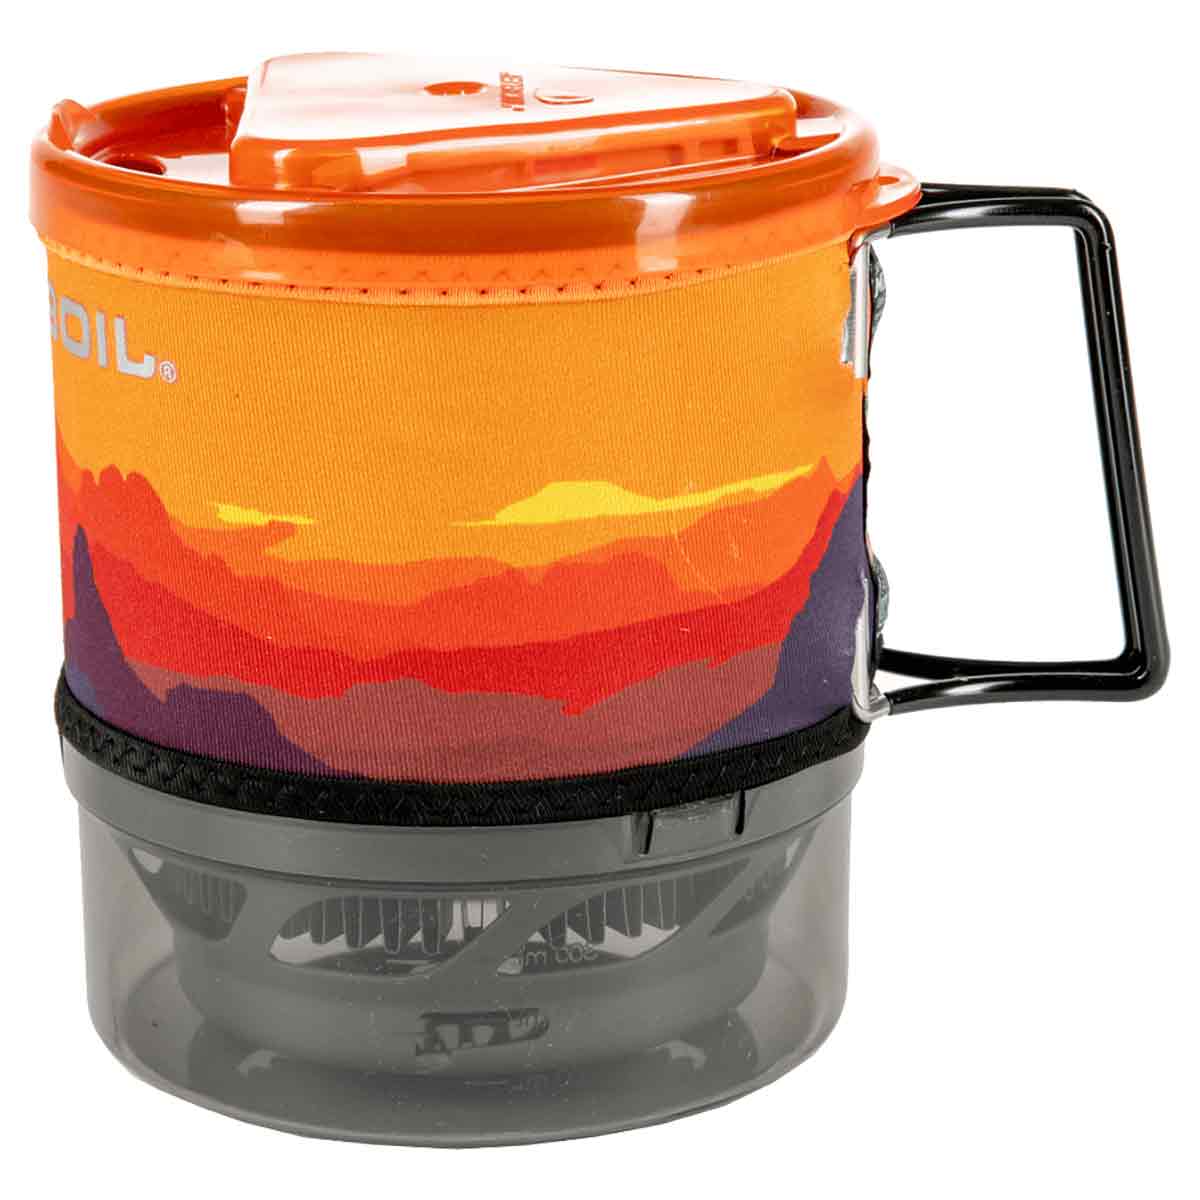 Jetboil Minimo Sunset MNMSS Cooking Stove - John Bull Clothing